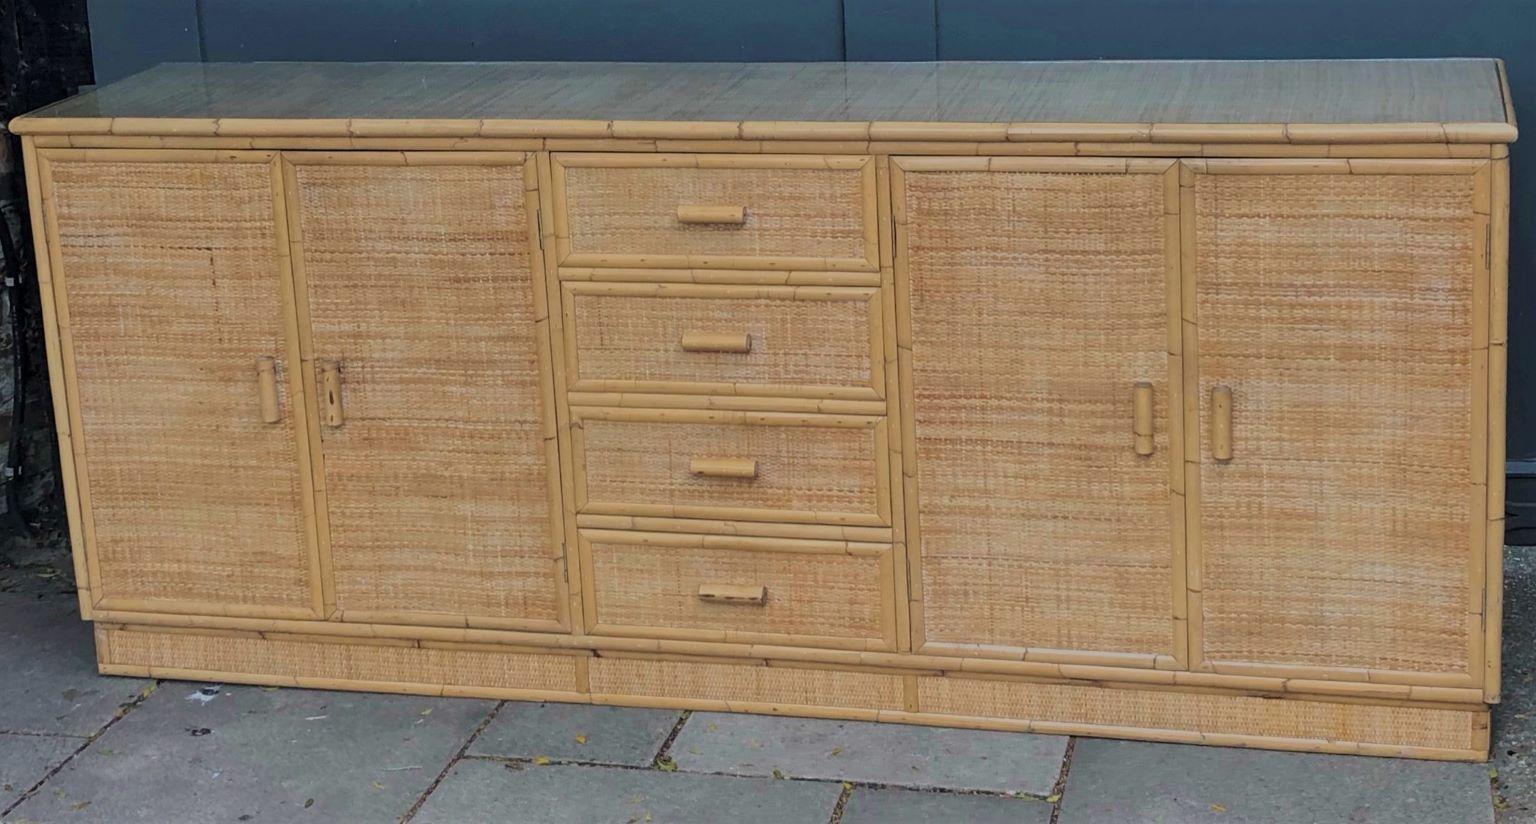 Mid Century rattan and bamboo sideboard, Italy, 1970s

Large and impressive sideboard, wooden structure with rattan and cane detail, covered in close weave matting, also with cane handles.

Four drawers in the middle, with a two door cupboard